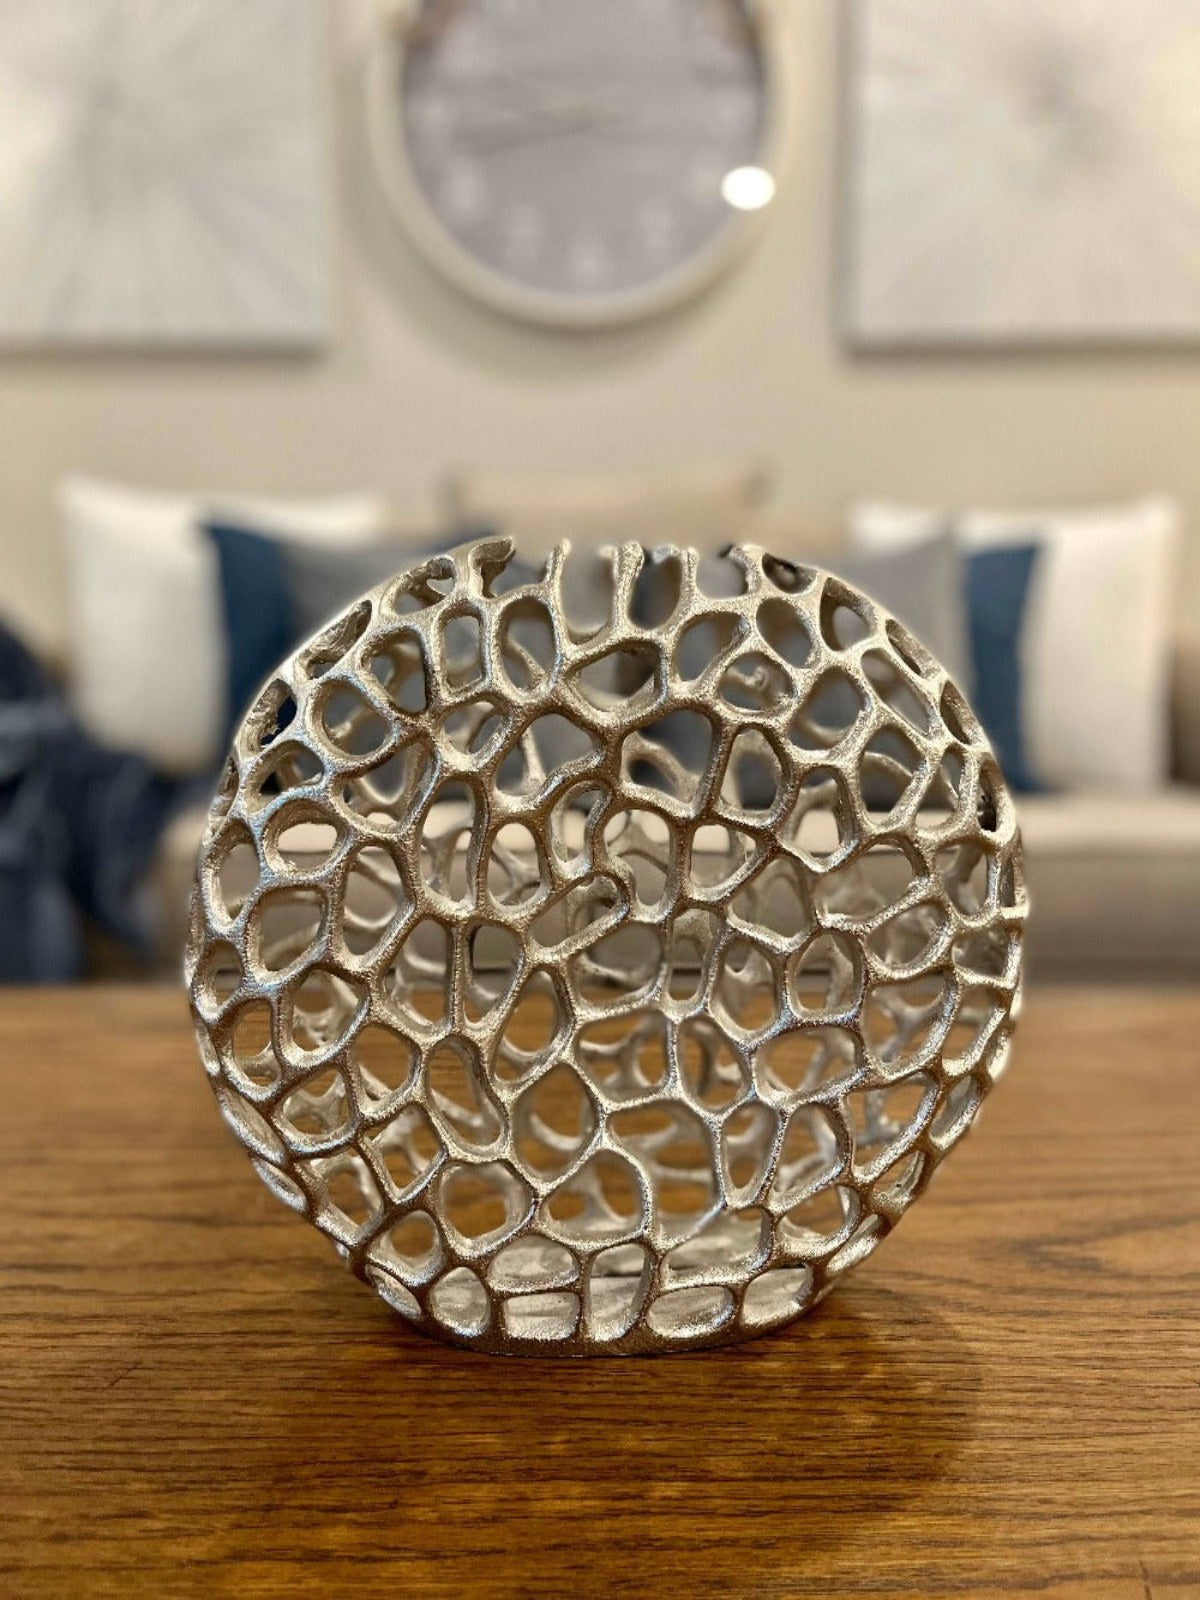 The Round Corallo Table Vase makes a Statement on a Shelf or Table. Natural Open Unique Design and Shiny Nickel Finish make this Vase a winner in any Contemporary Decor. 